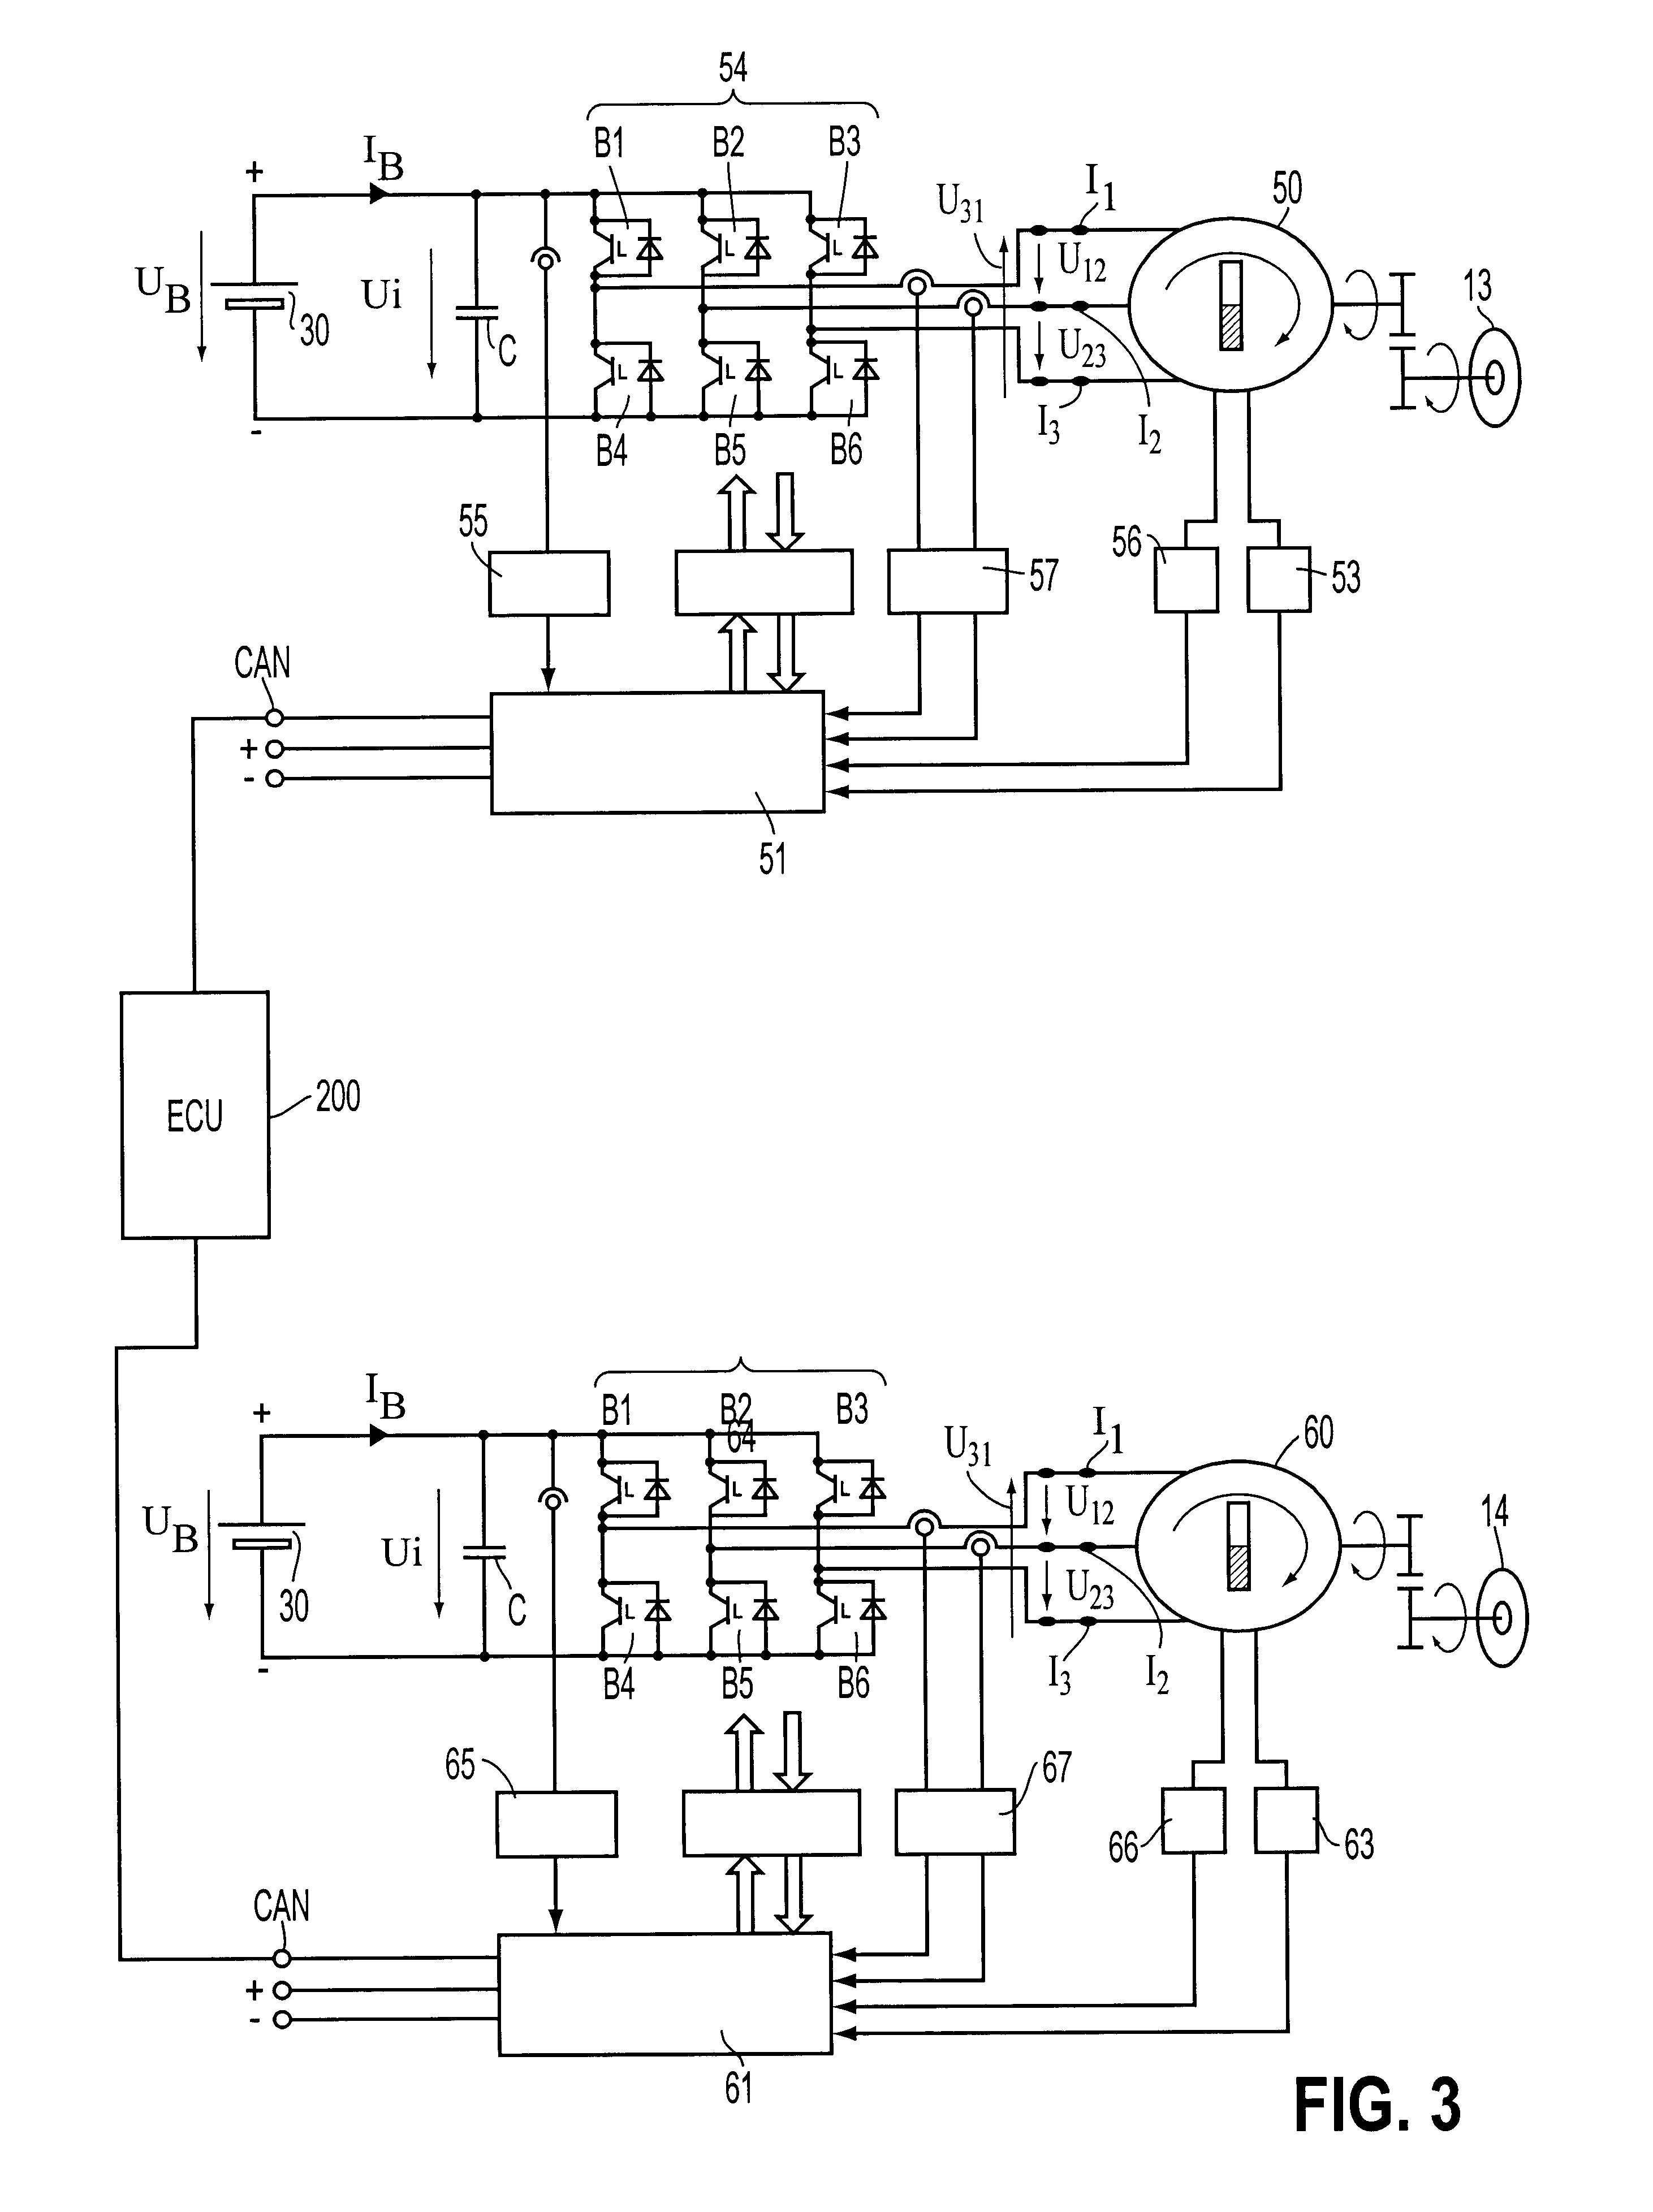 Method and apparatus for adaptively controlling a state of charge of a battery array of a series type hybrid electric vehicle